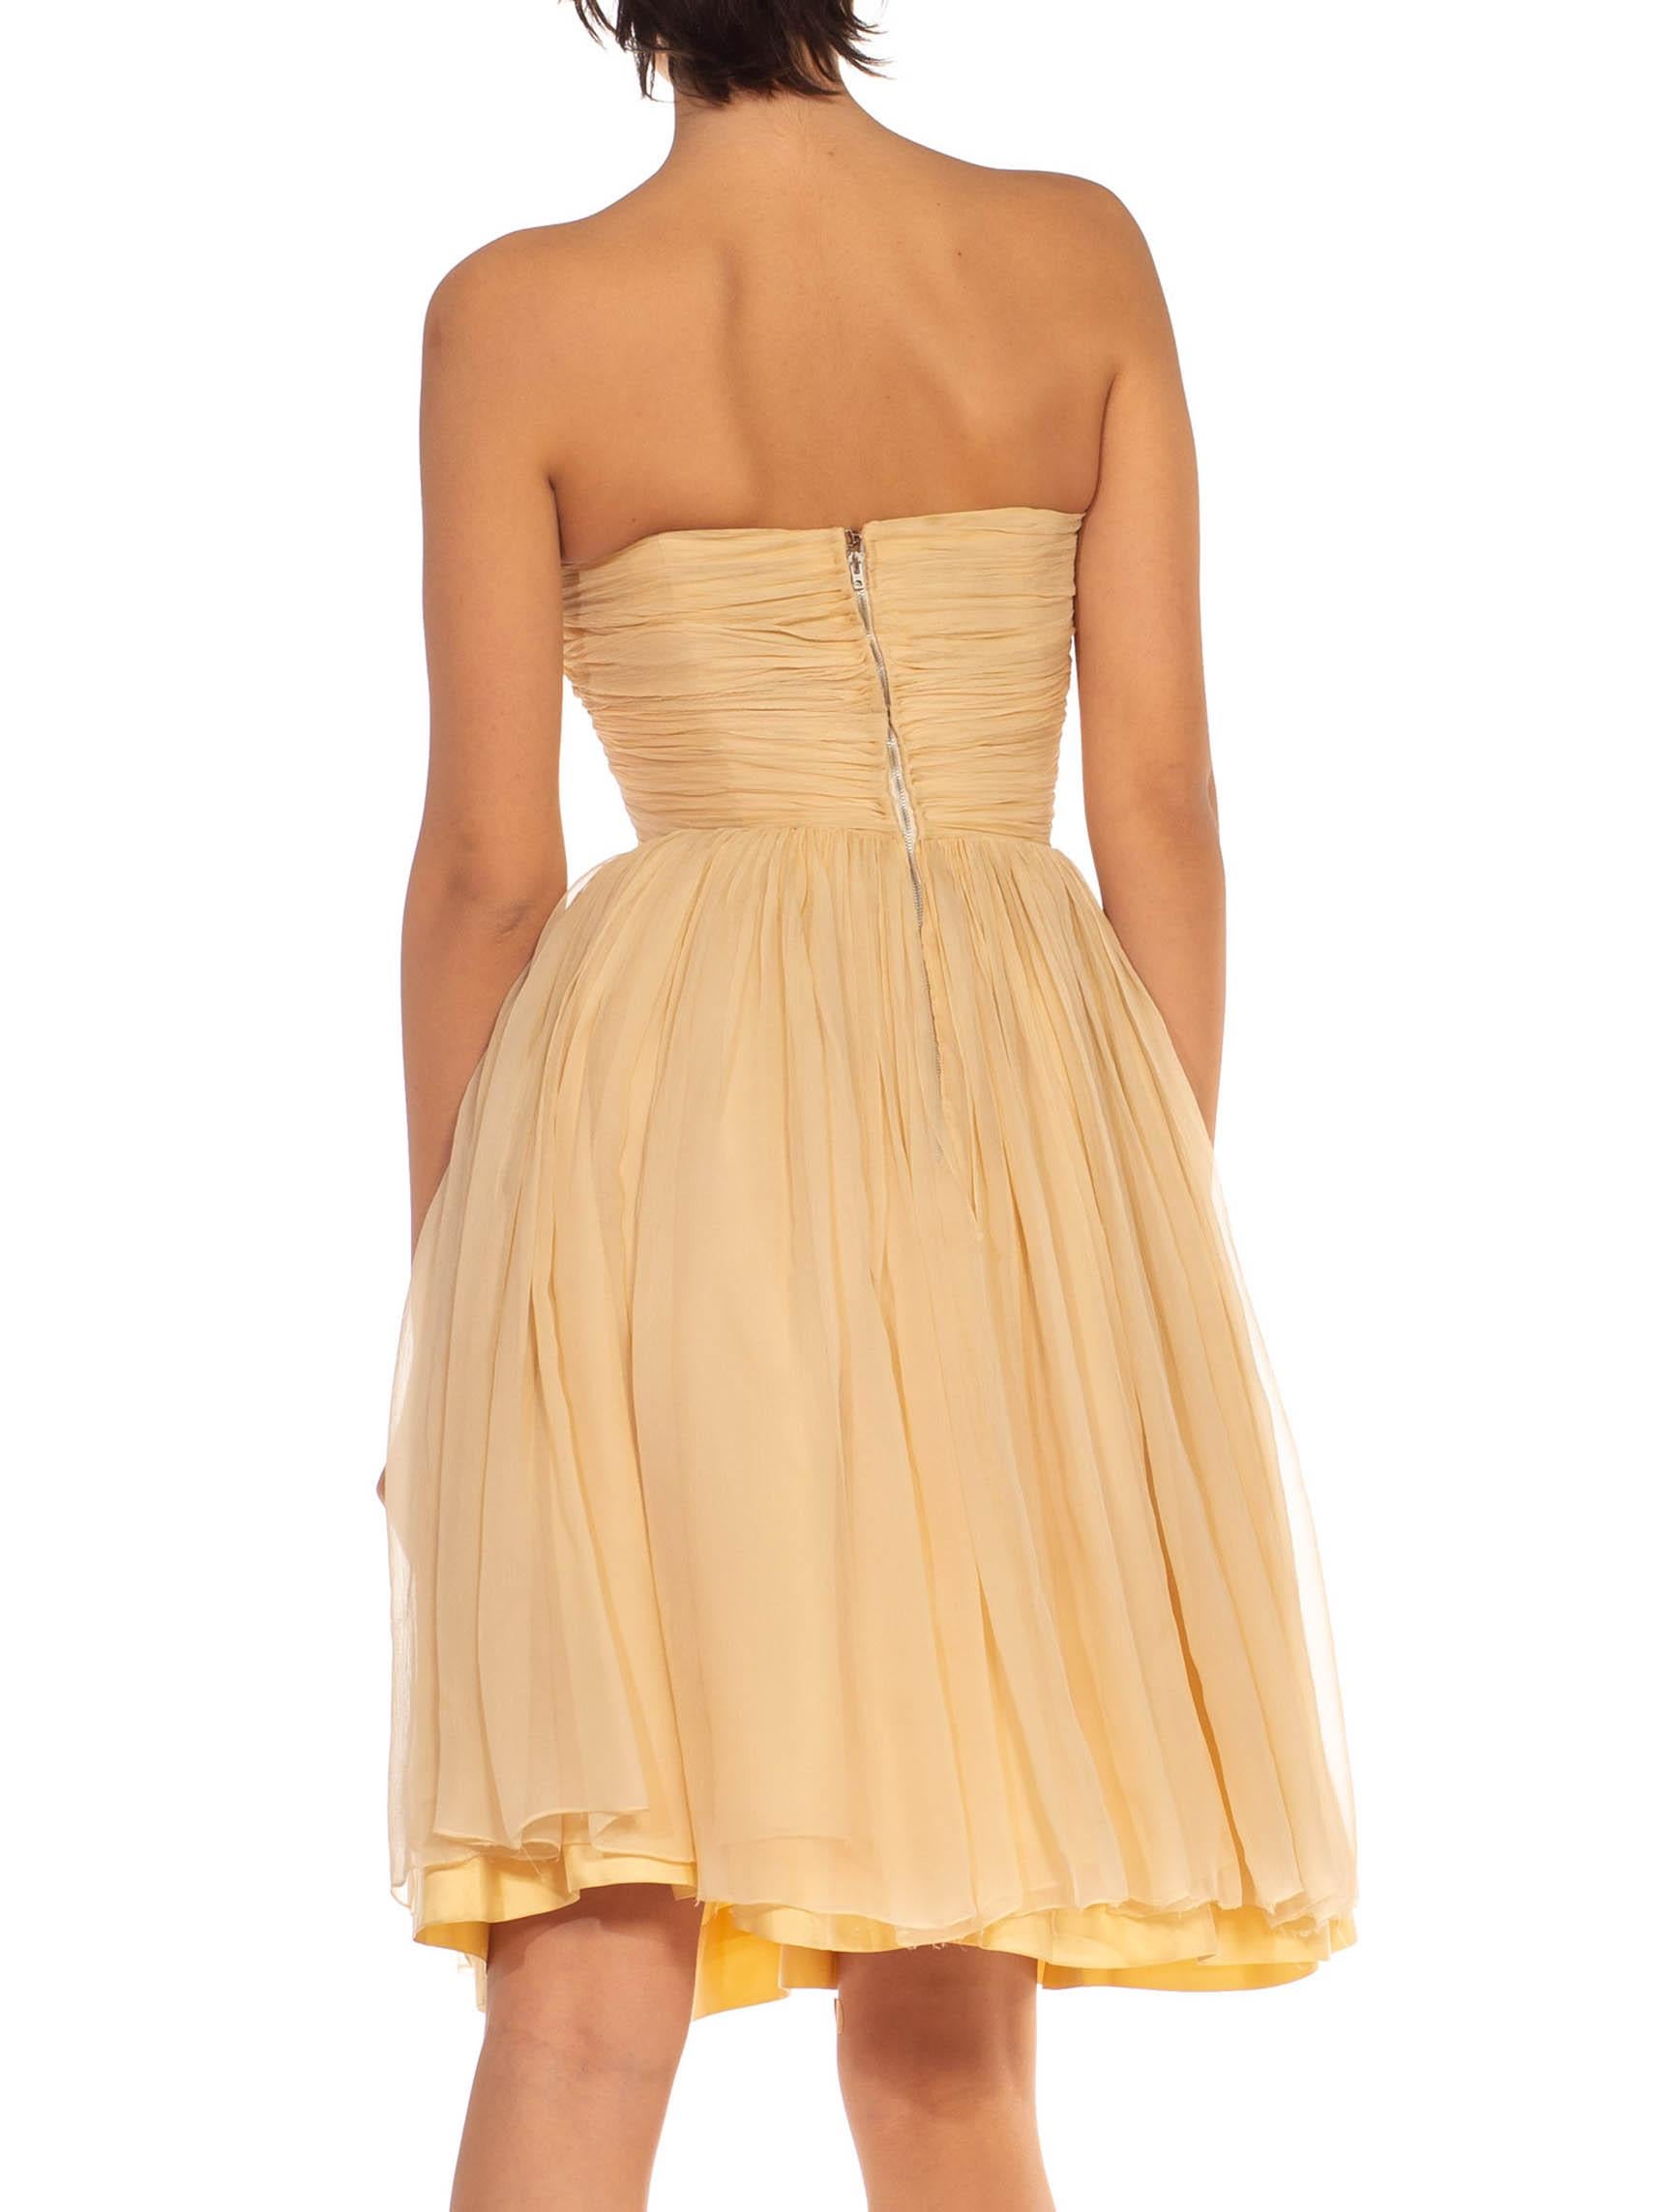 1950S Pierre Balmain Ivory Silk Chiffon Ruched Strapless Cocktail Dress For Sale 3